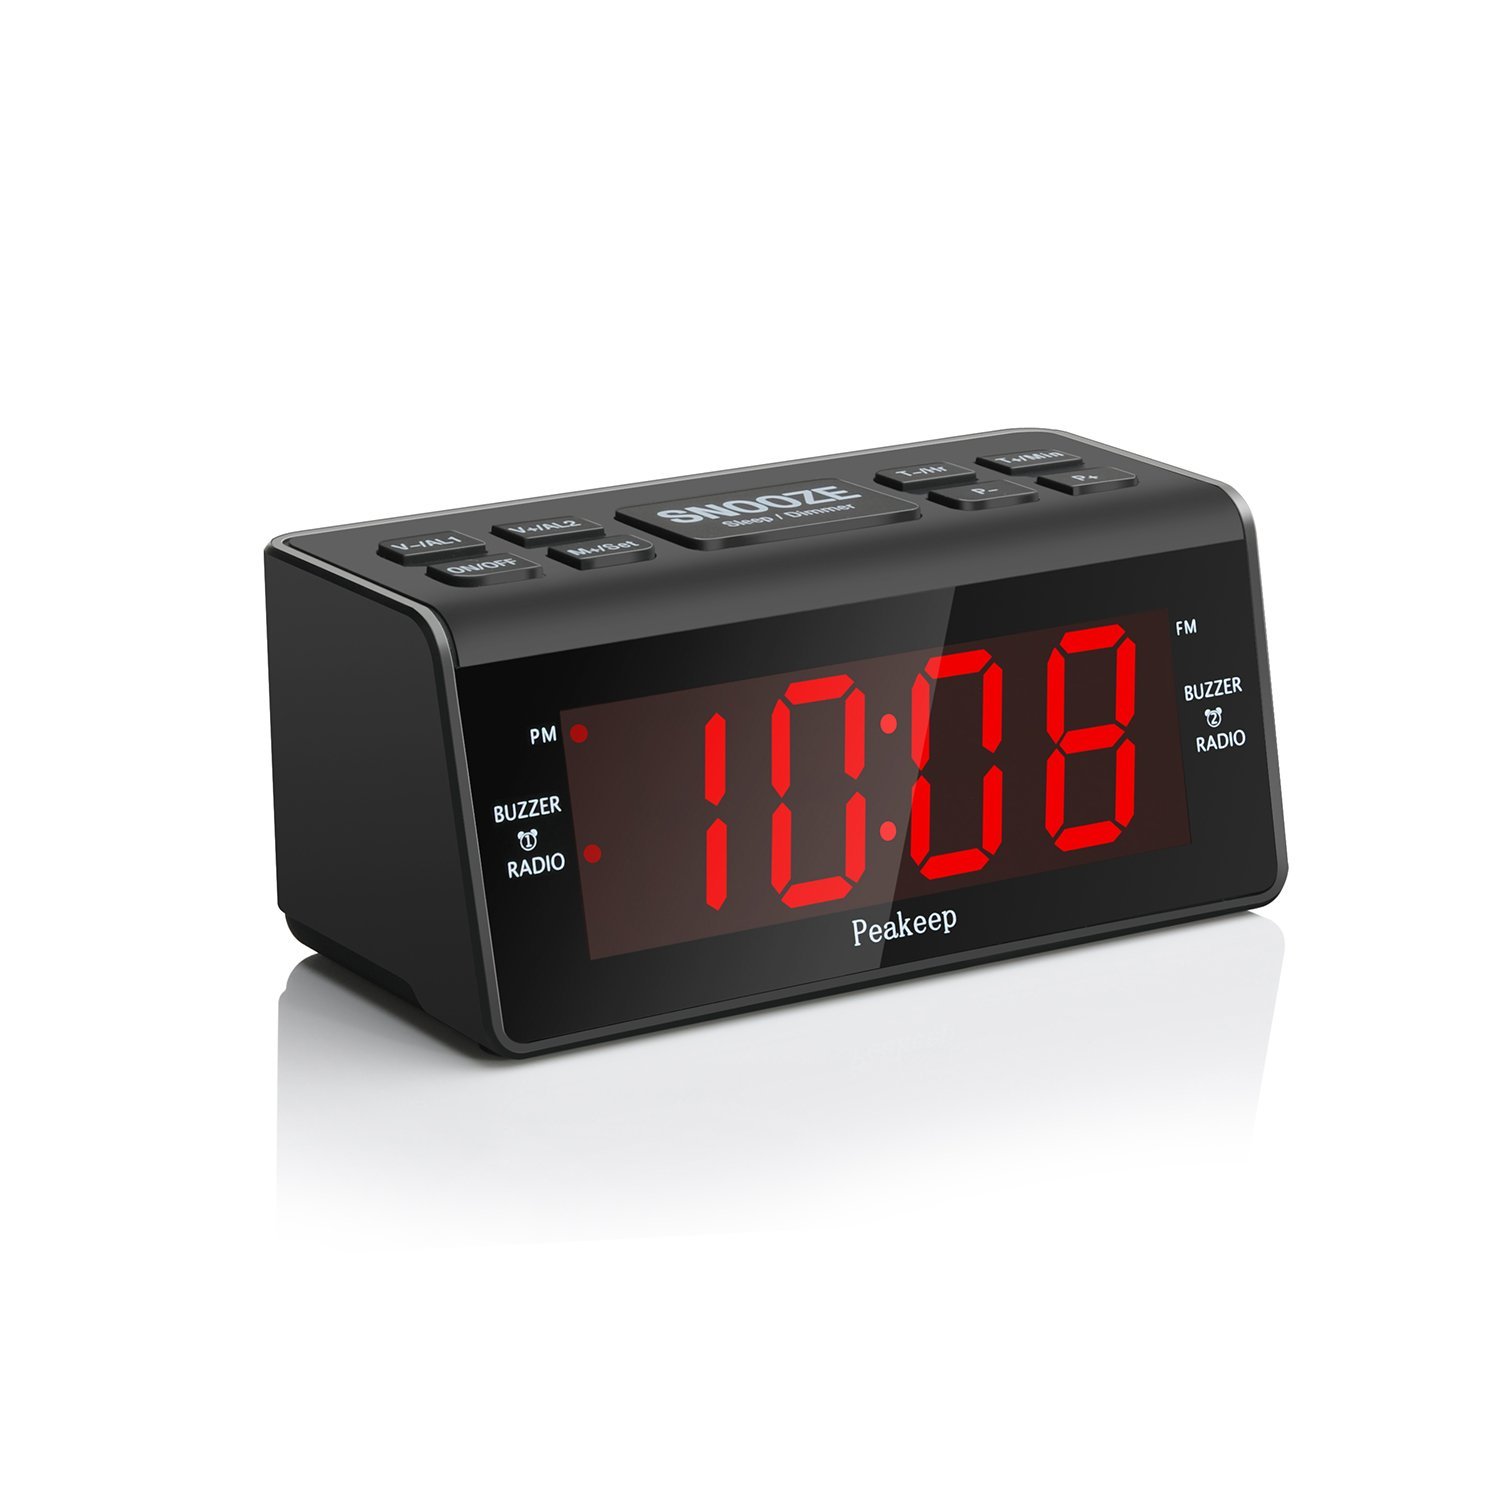 Peakeep Little Digital FM Radio Dual Alarm Clock with Snooze and Sleep Timer, Large Display with 2 Dimmer